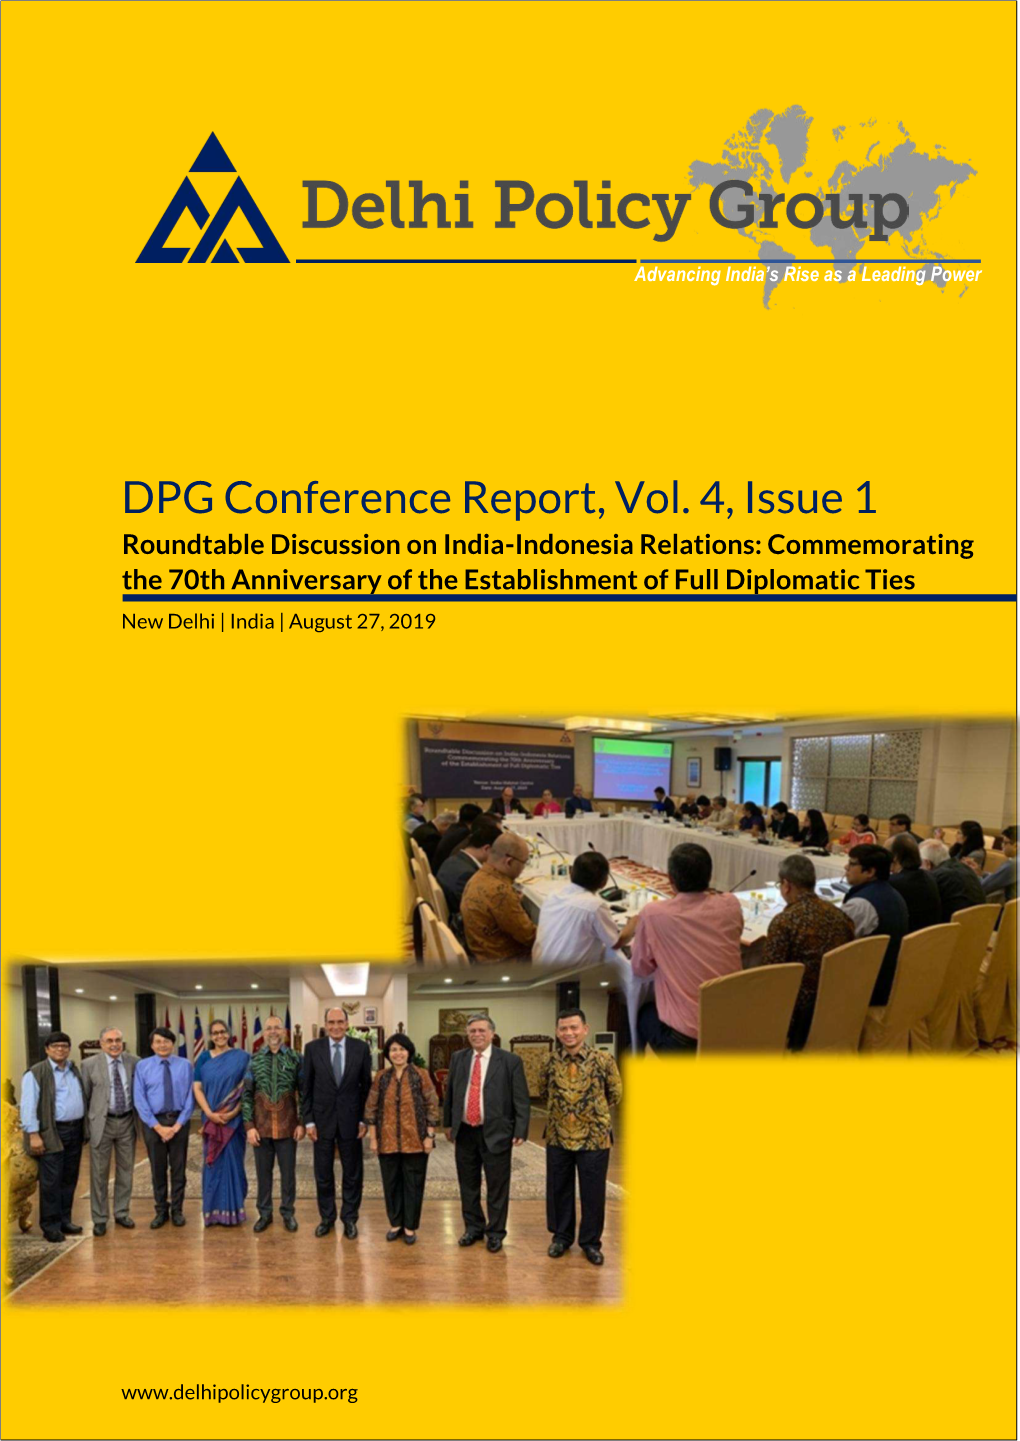 DPG Conference Report, Vol. 4, Issue 1